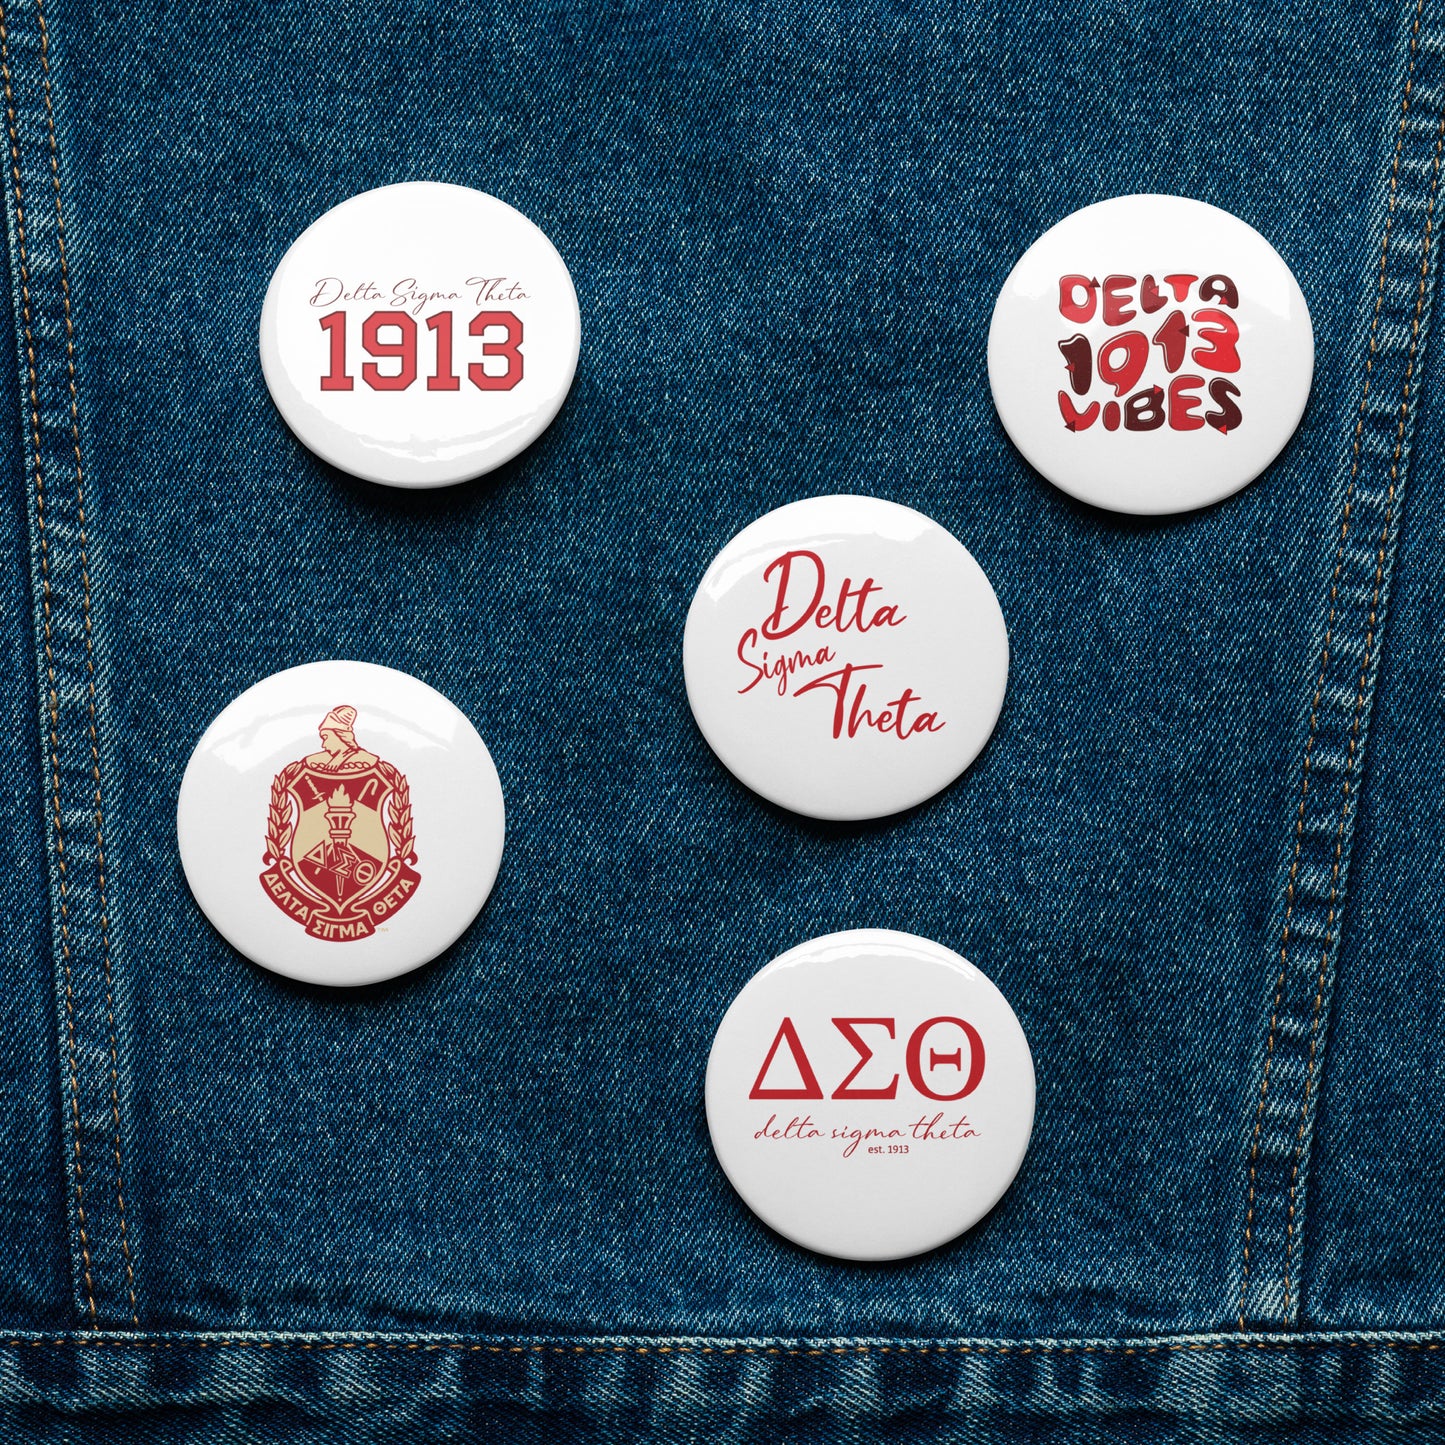 Delta pin buttons